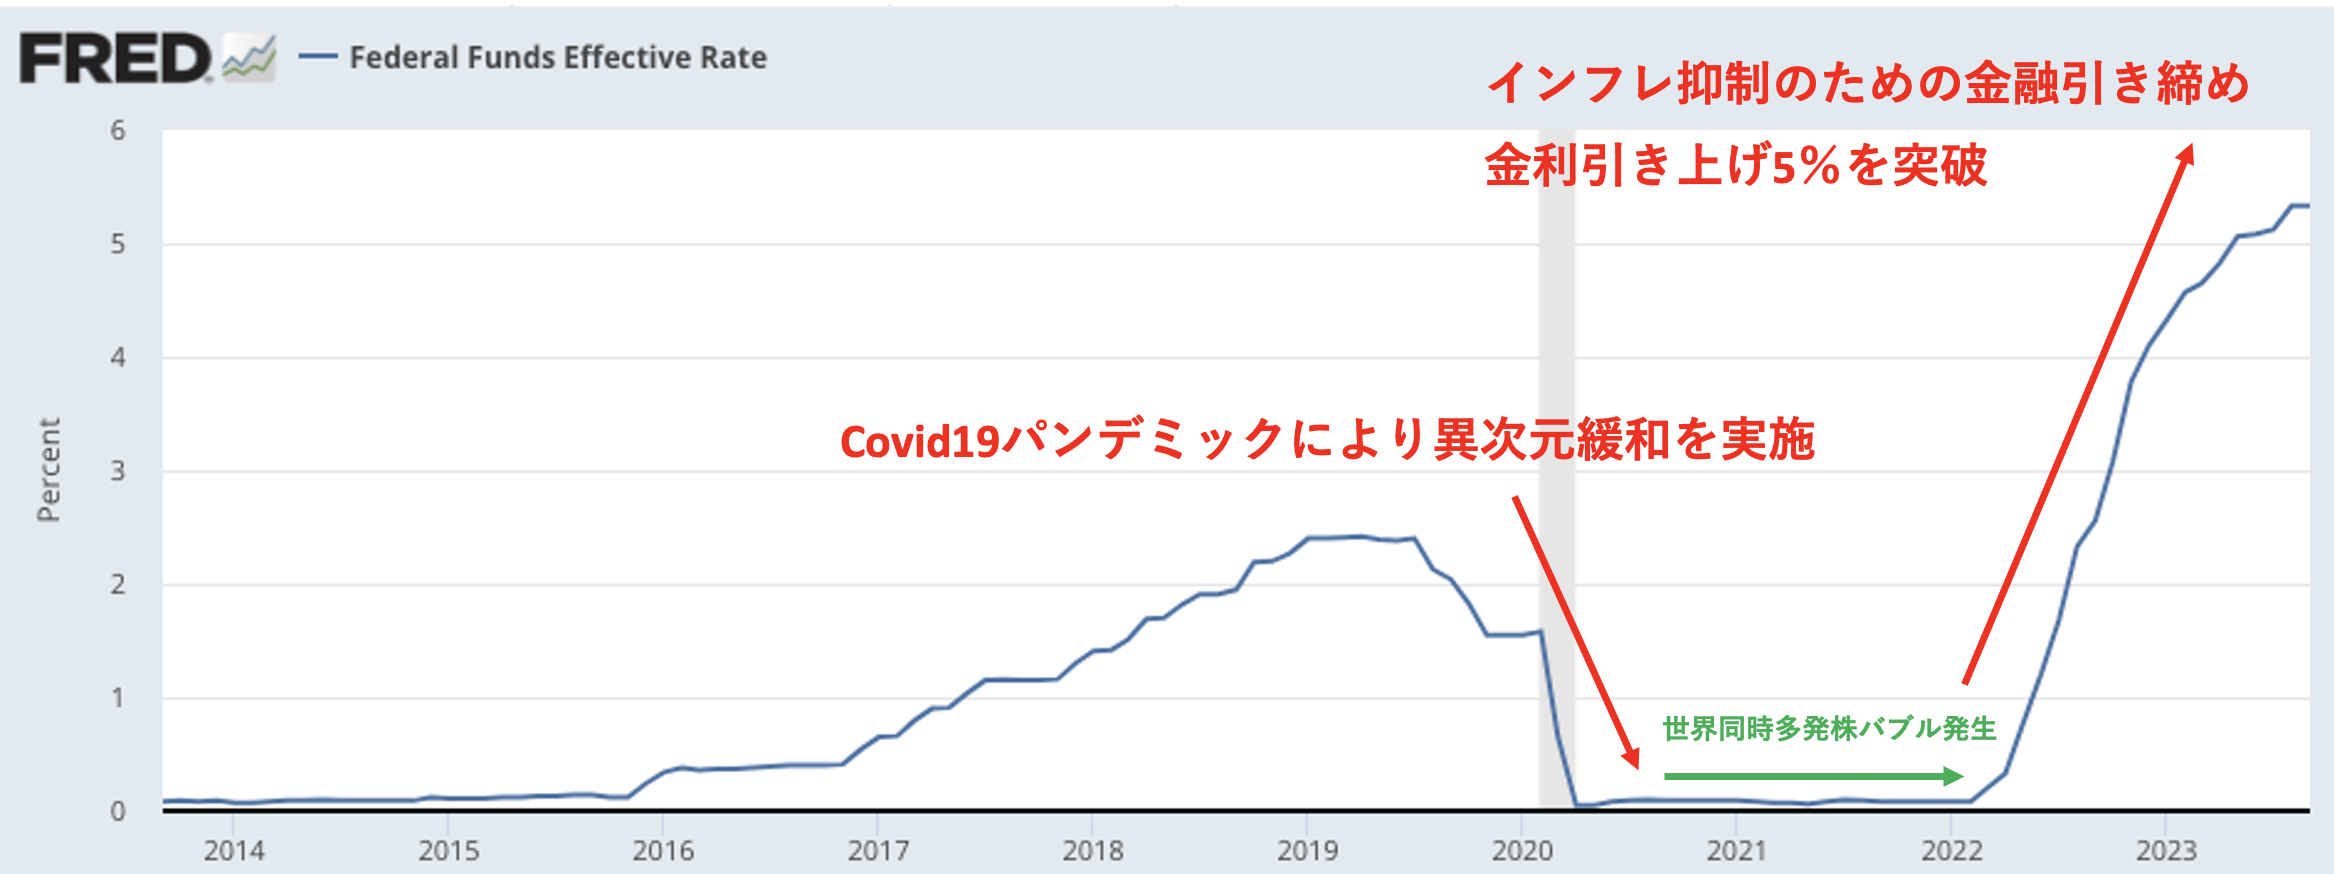  Federal Funds Effective Rate (FEDFUNDS) の推移